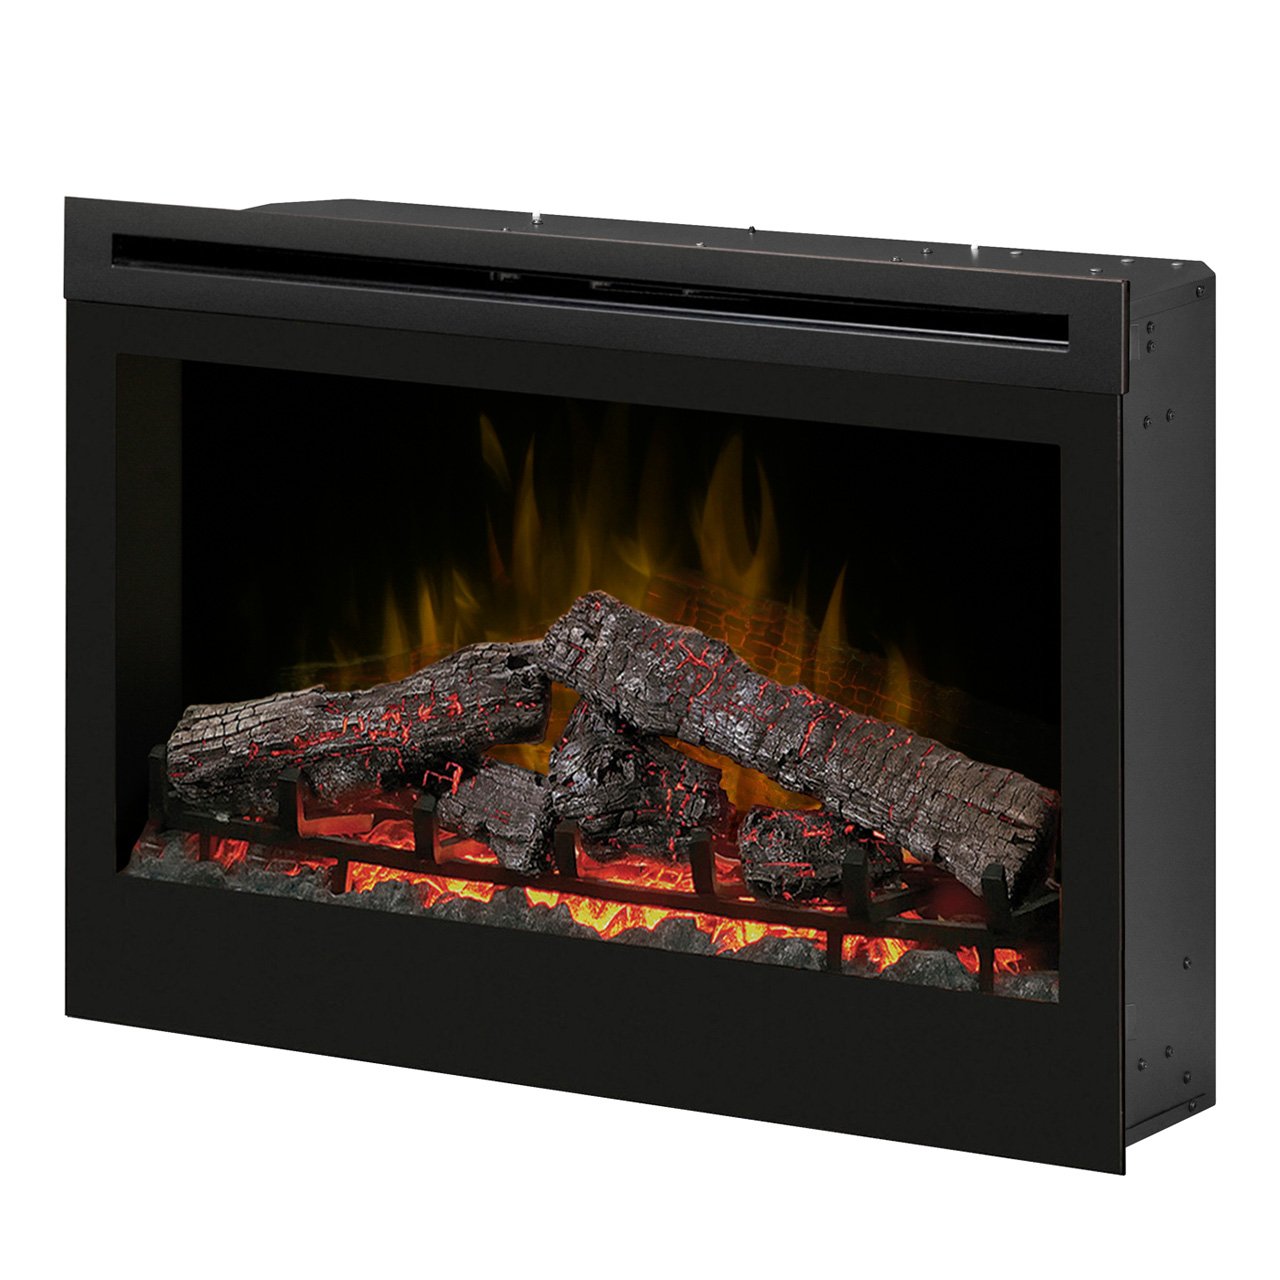 Faux Fireplace for Sale Awesome Dimplex Df3033st 33 Inch Self Trimming Electric Fireplace Insert